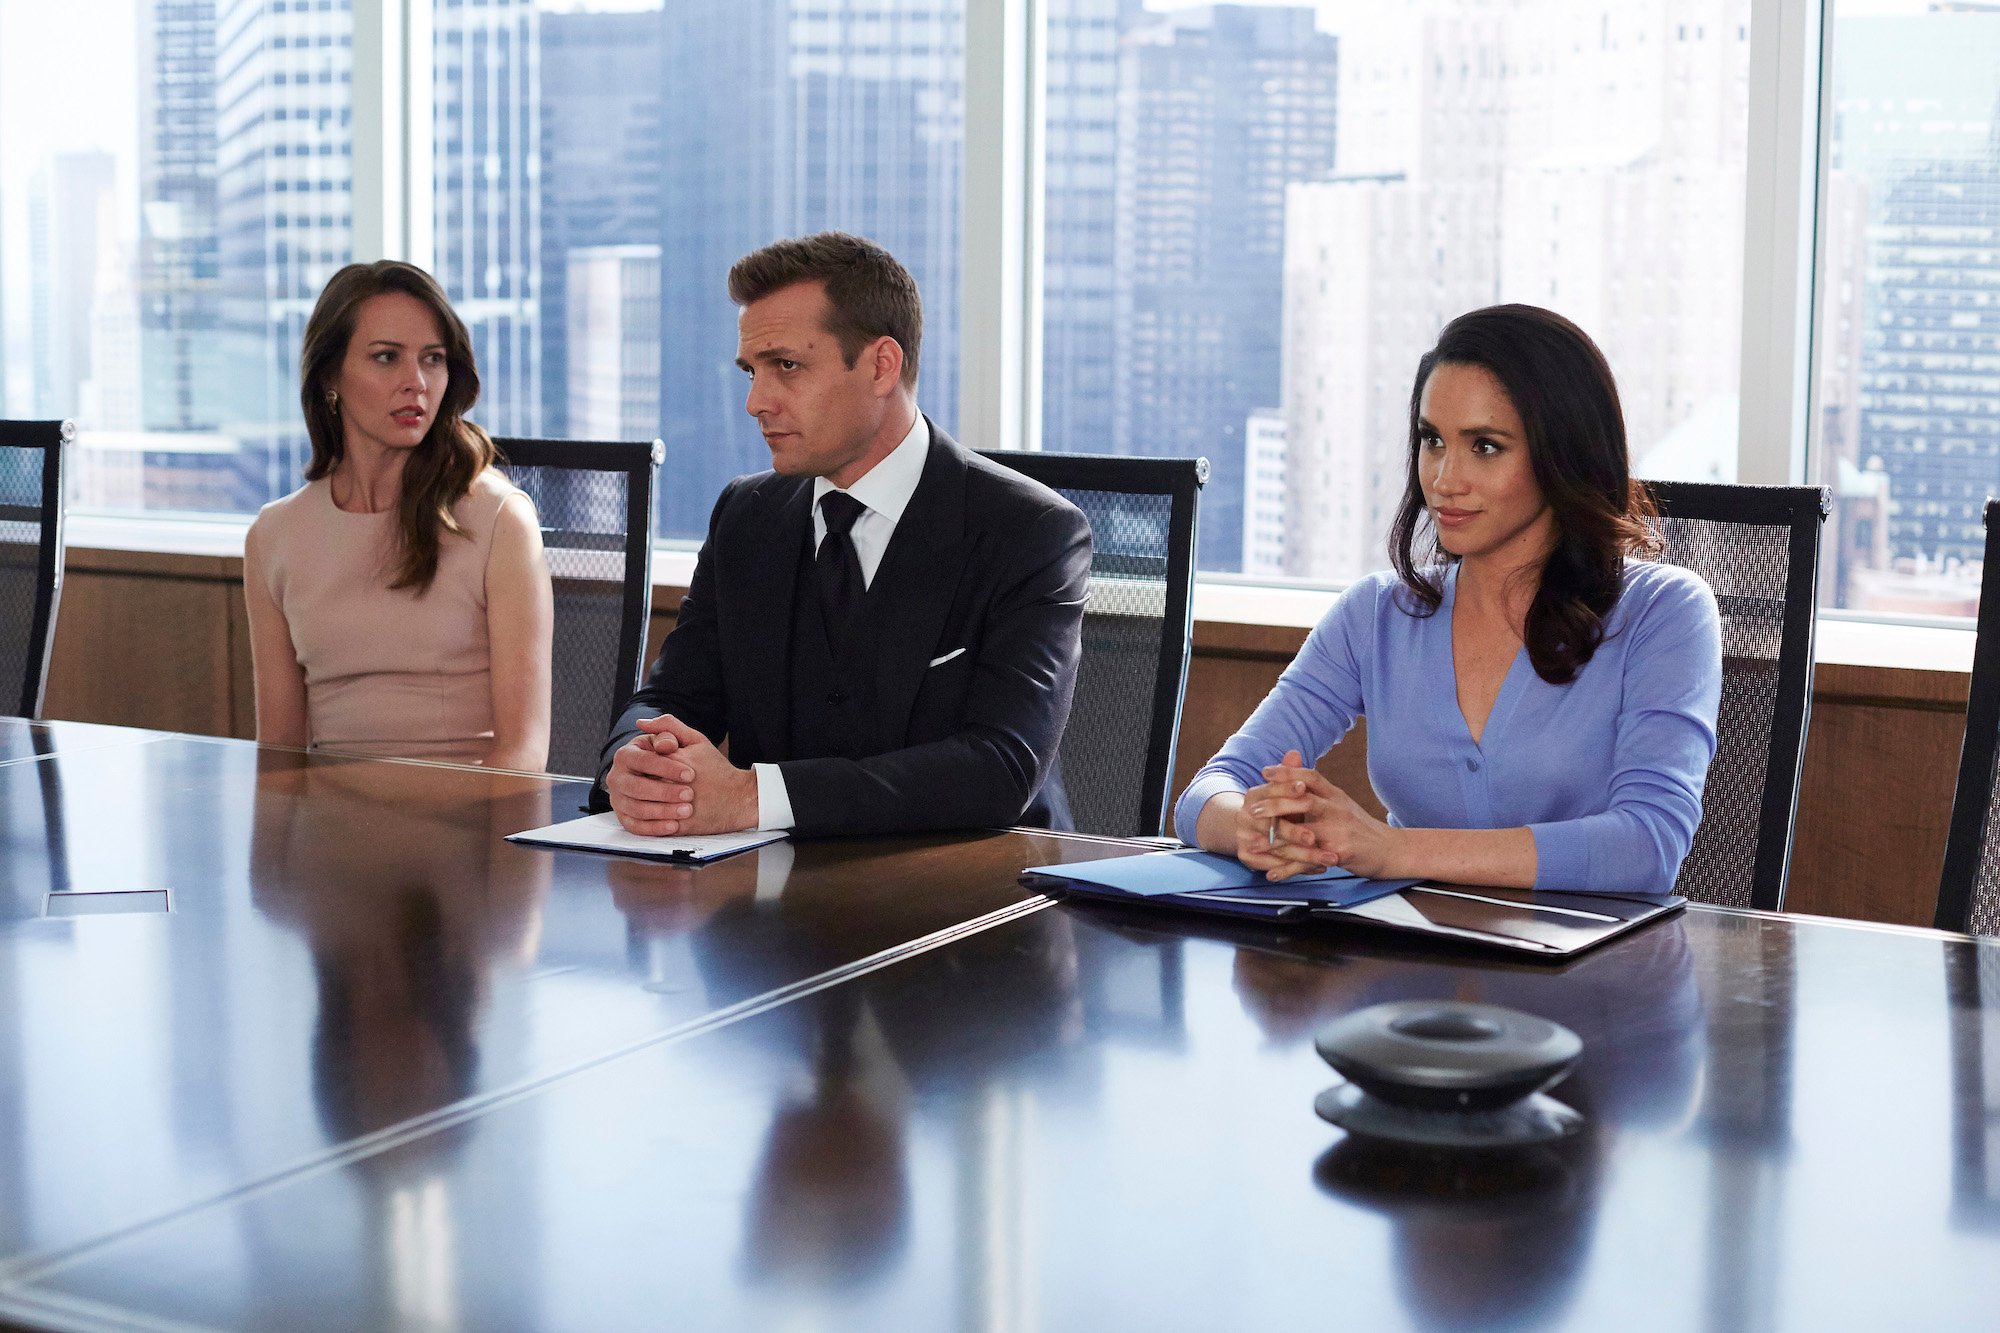 (L-R) Amy Acker as Esther, Gabriel Mact as Harvey Specter, Meghan Markle as Rachel Zane seated at a table on 'Suits'